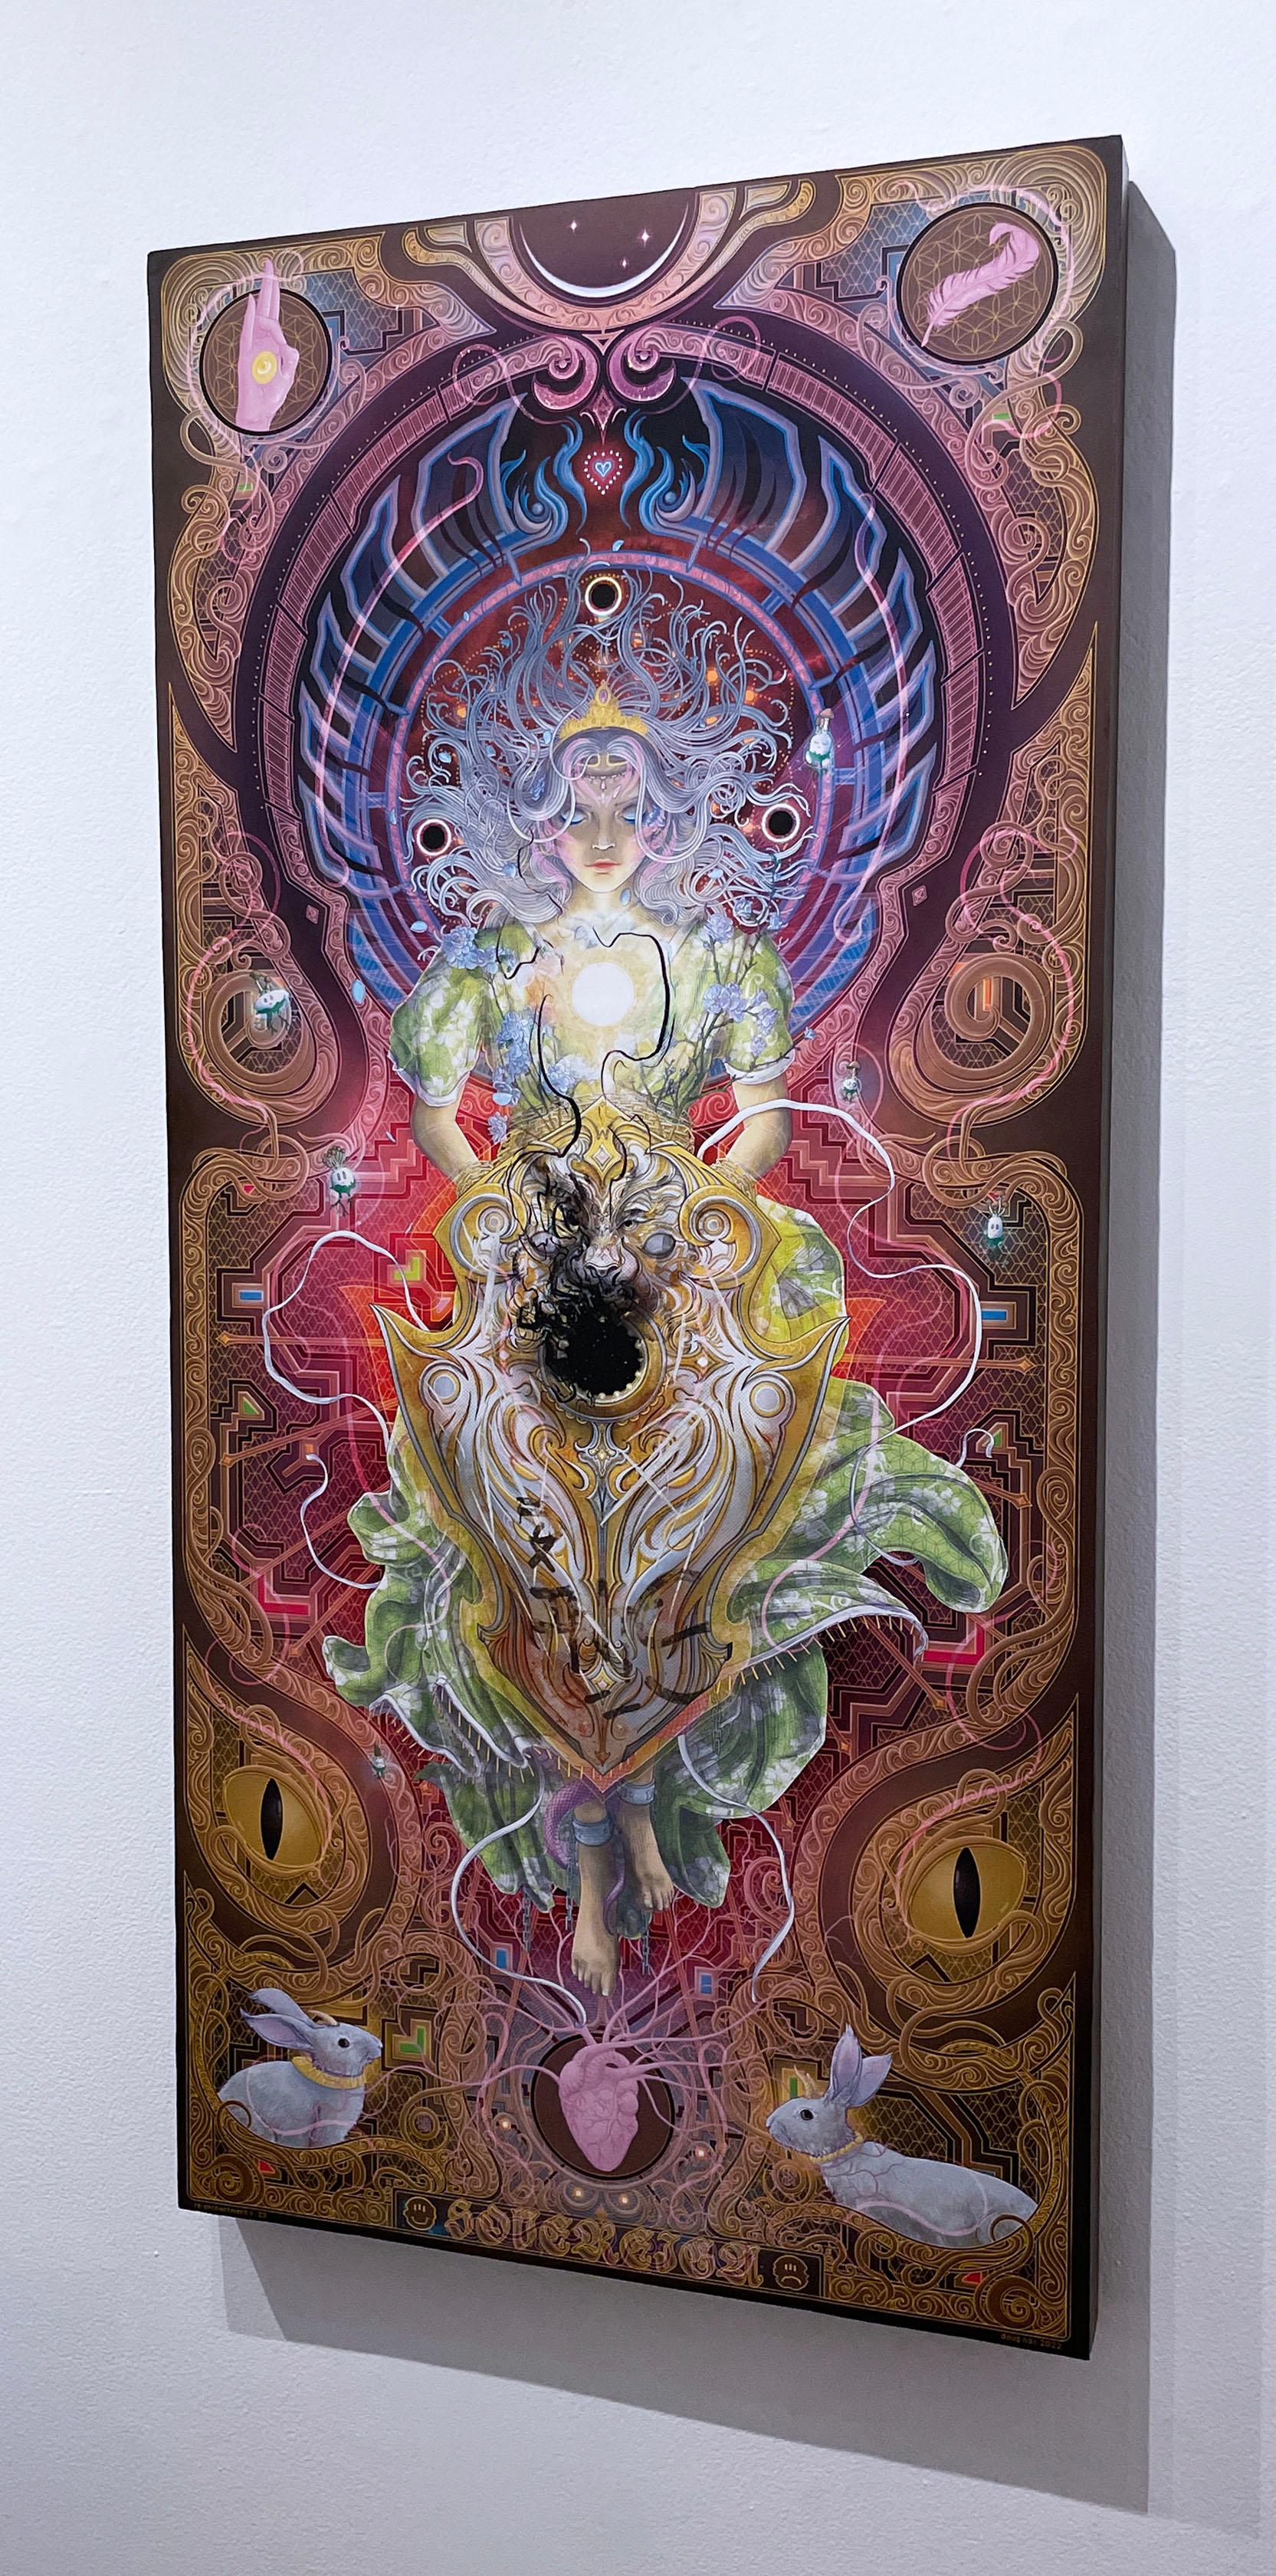 Sovereign Shield (2022) by Doug Nox (Harlequinade), psychedelic, cosmic, giclée For Sale 1